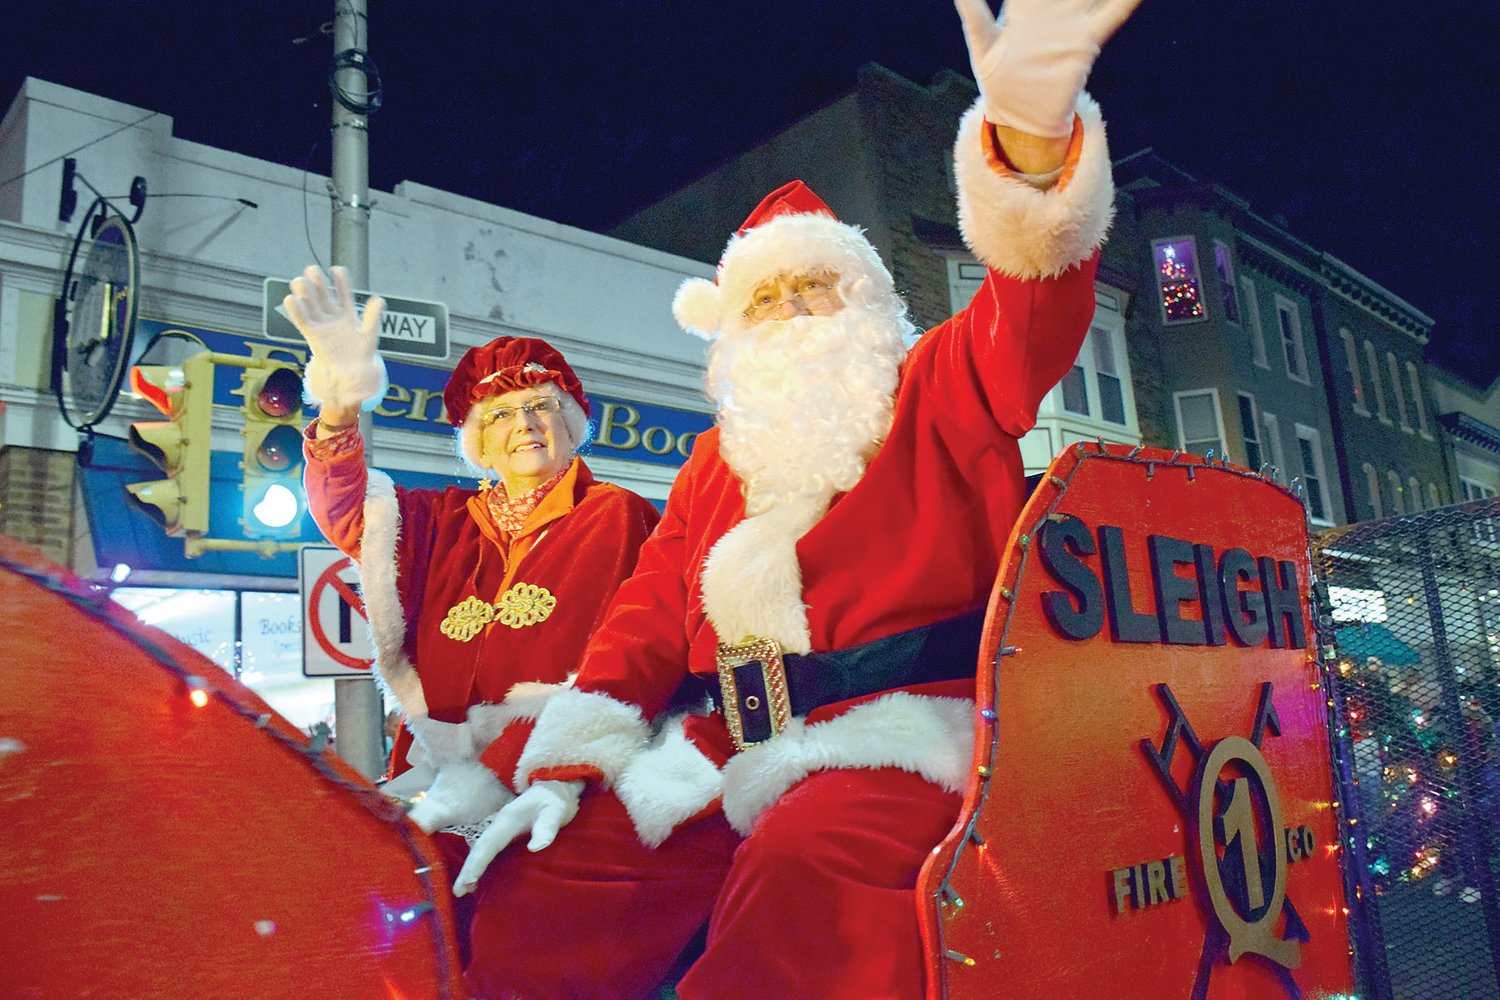 Santa and Mrs. Claus arrive.